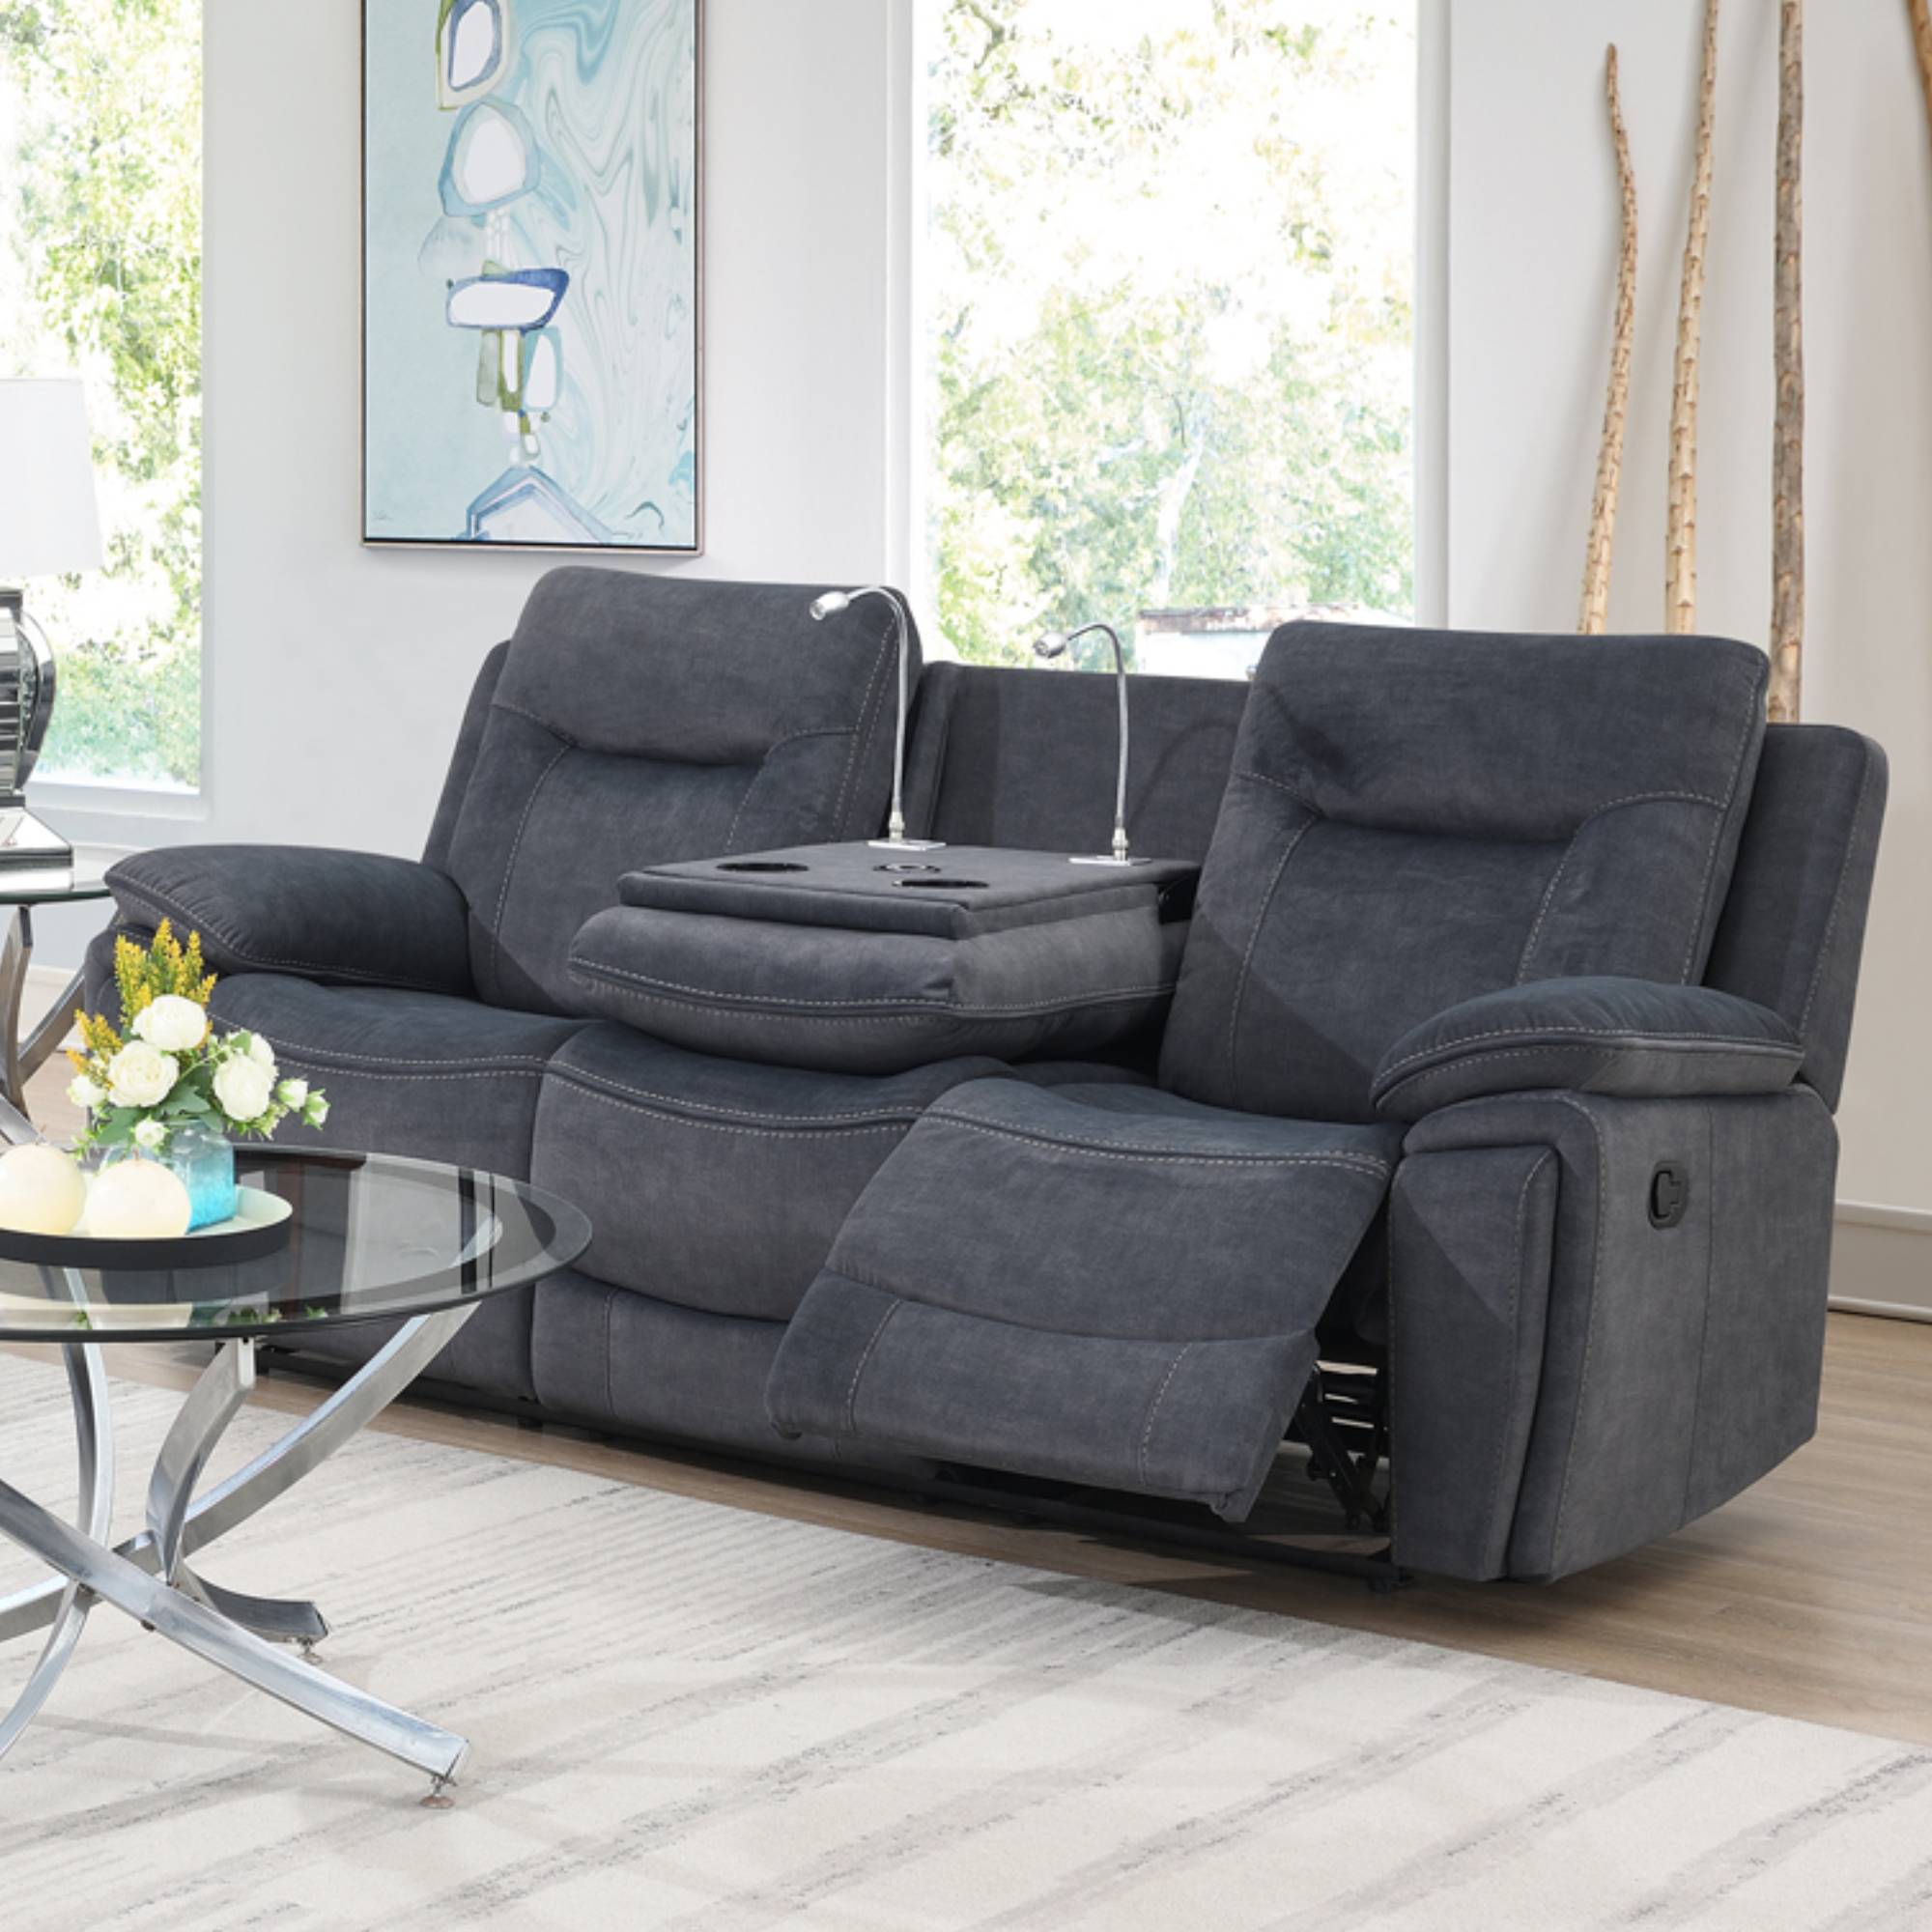 Finley Grey 3 Seater Electric Reclining Sofa | Wireless Charger Sofa